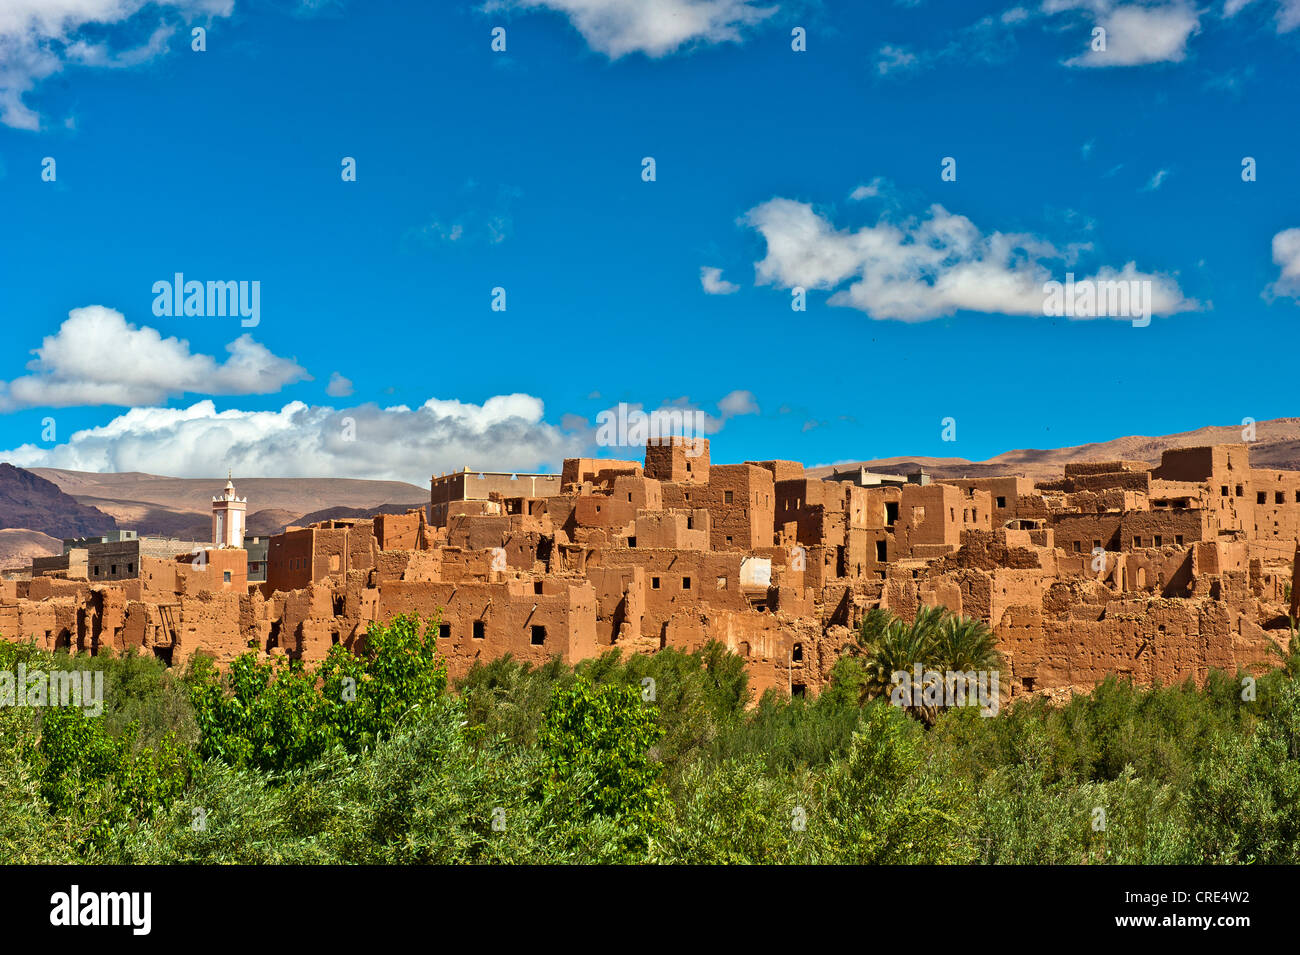 Remains of an old village of mud-walled houses, Ksar Berber village, Tinerhir, Morocco, Africa Stock Photo